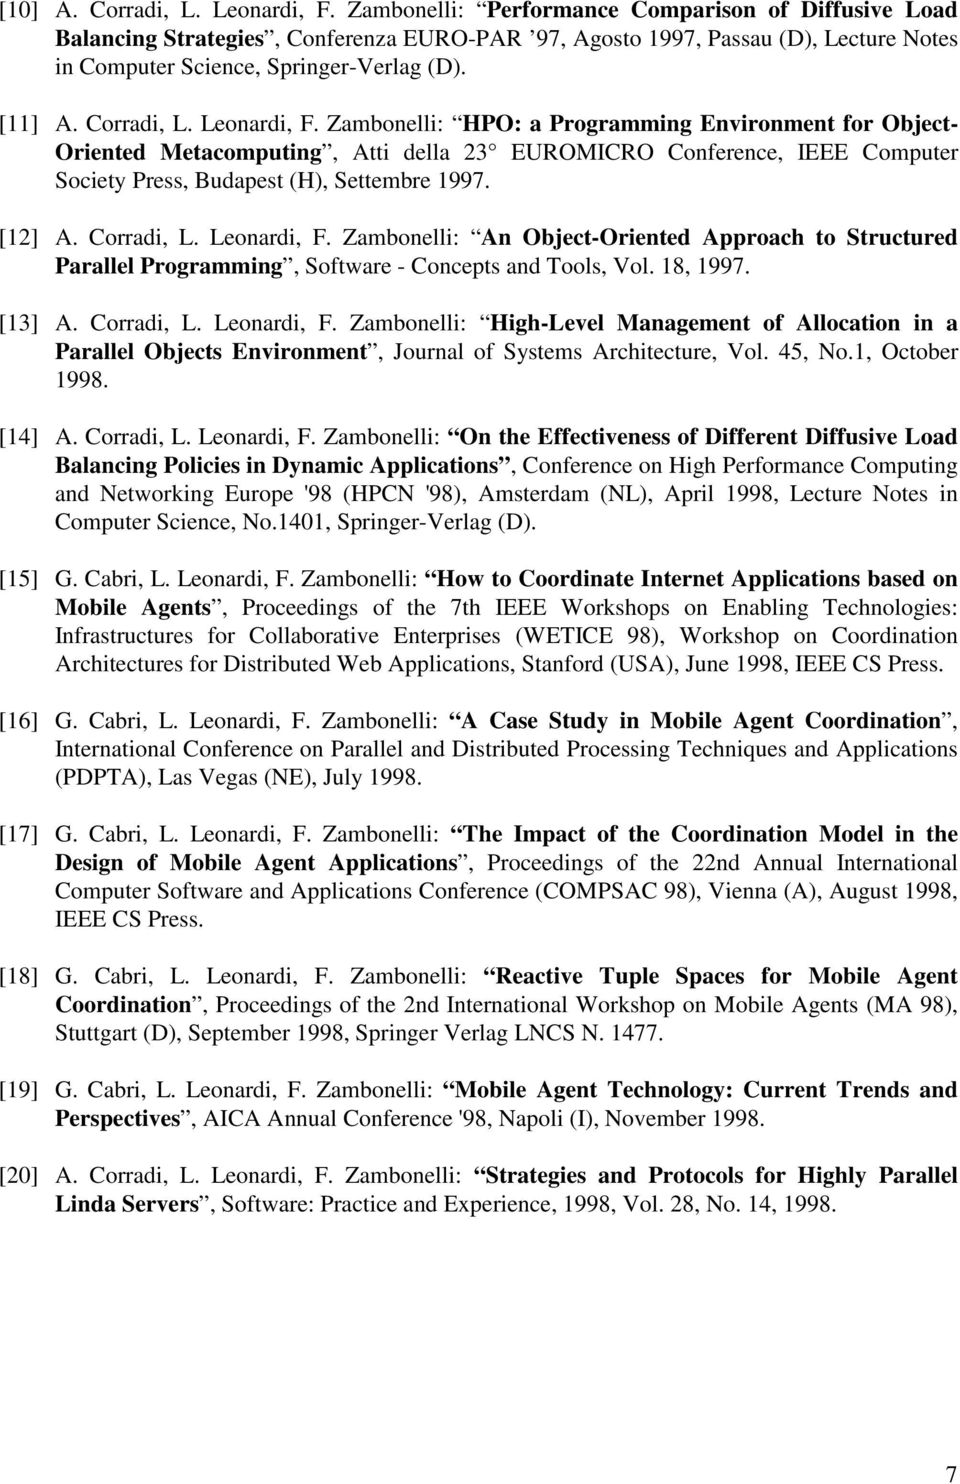 [12] An Object-Oriented Approach to Structured Parallel Programming, Software - Concepts and Tools, Vol. 18, 1997.